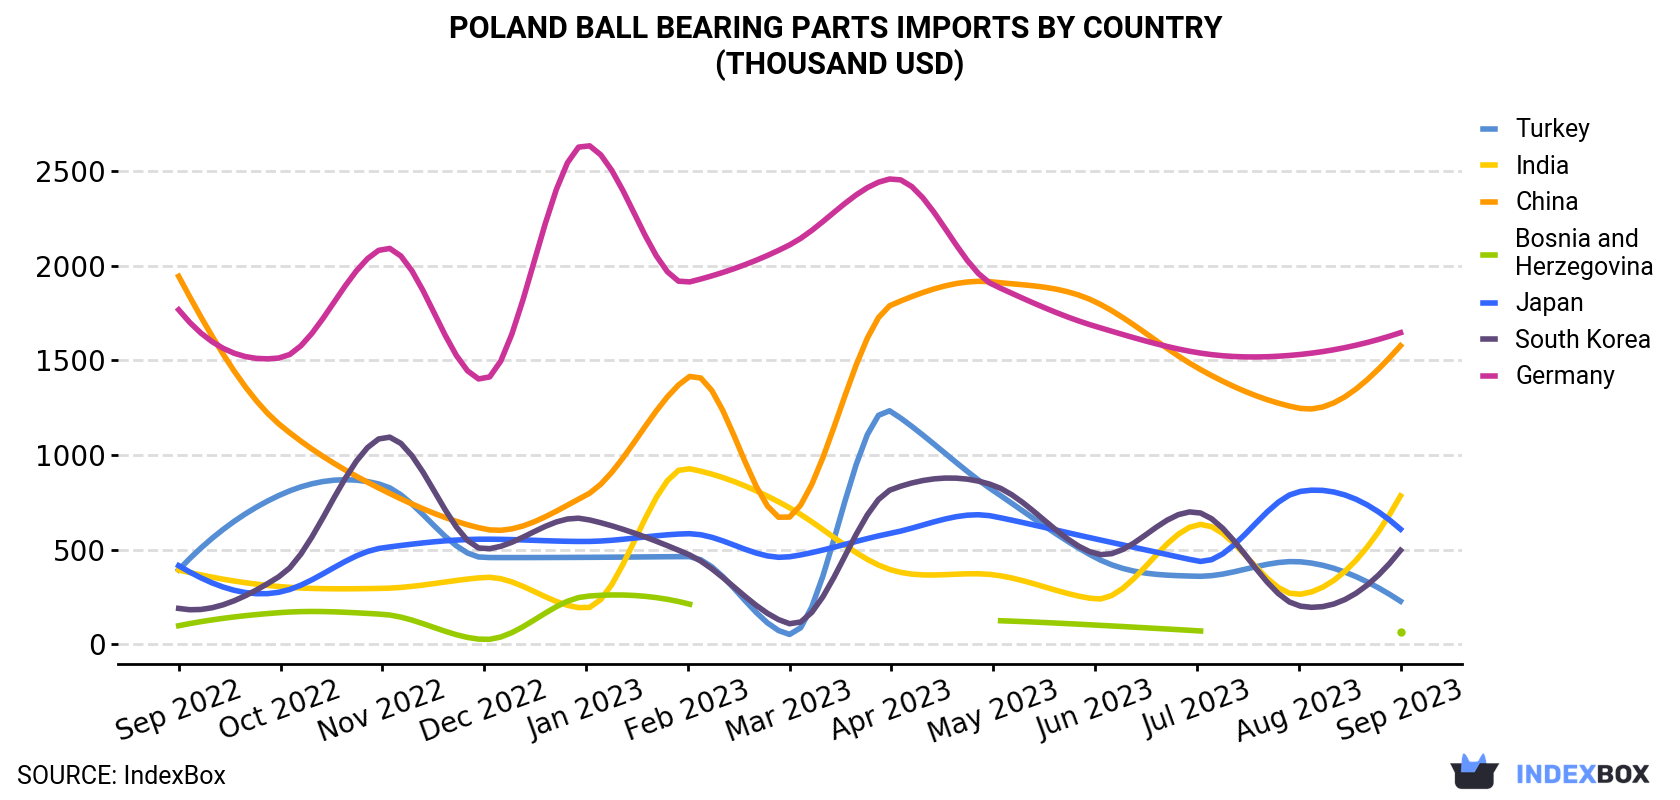 Poland Ball Bearing Parts Imports By Country (Thousand USD)